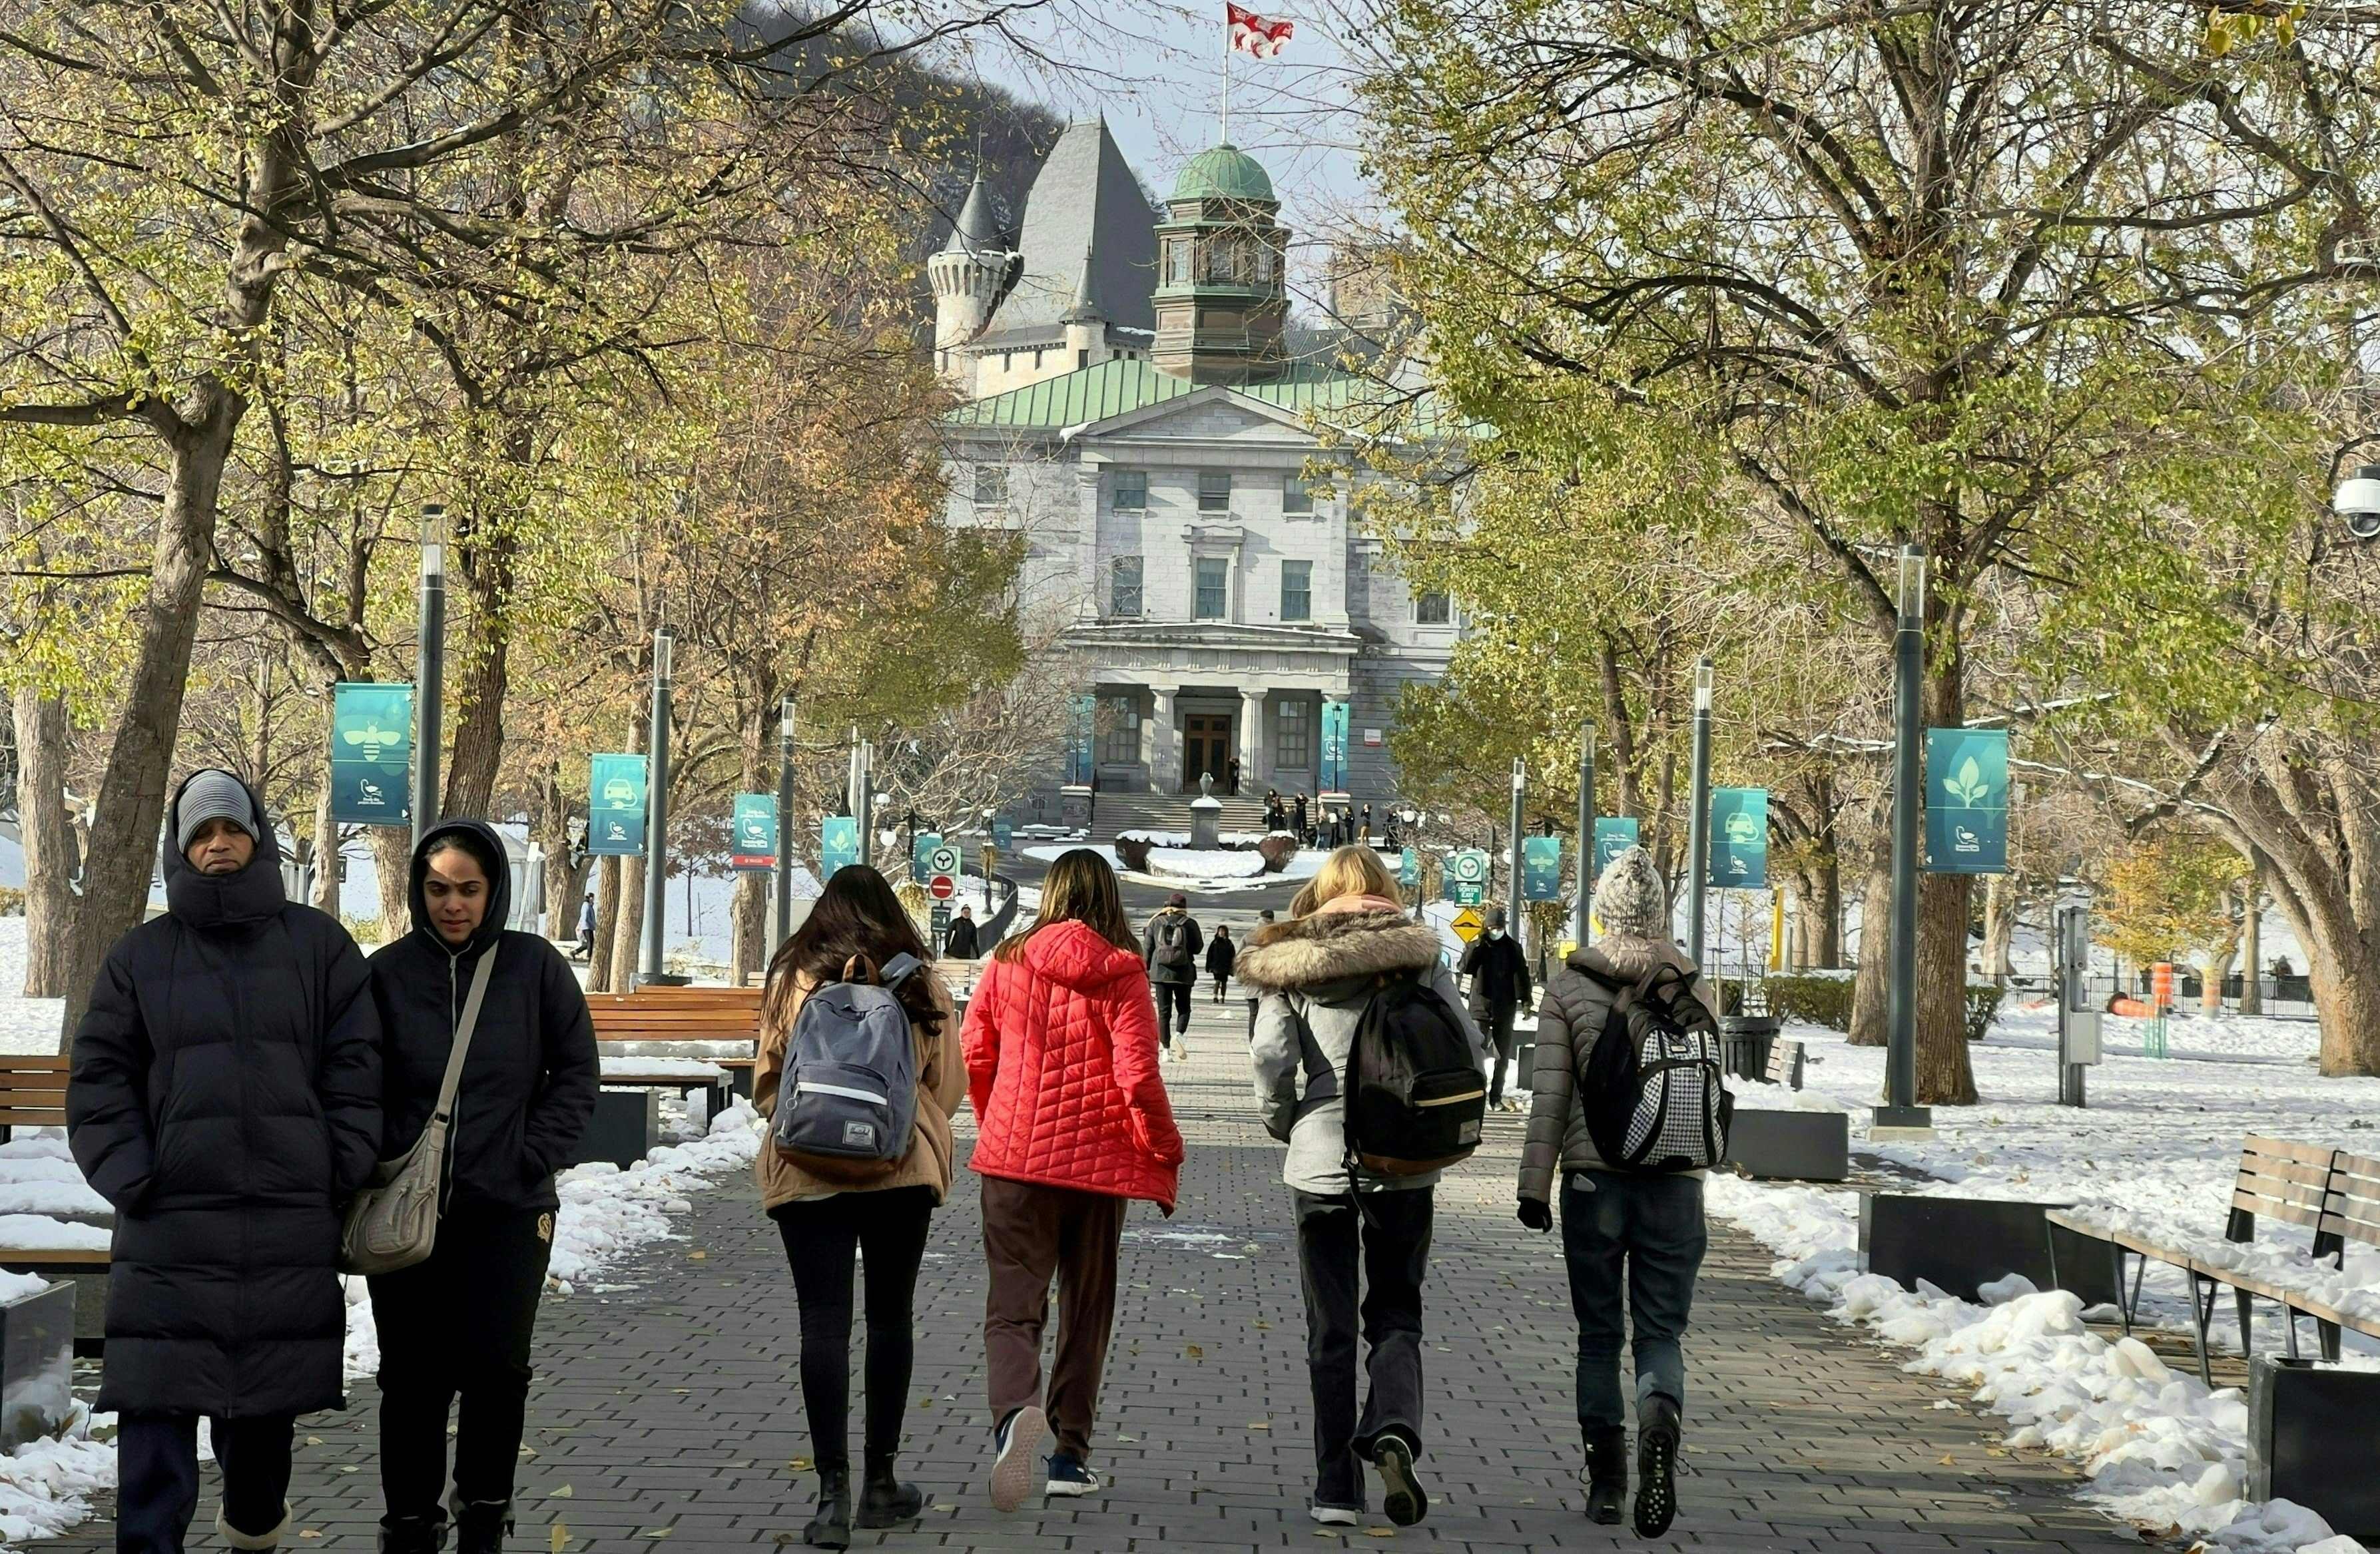 McGill university campus in Montreal, Canada. Canada has announced a two-year cap on international student visas to ease the pressure on housing. Photo: AFP